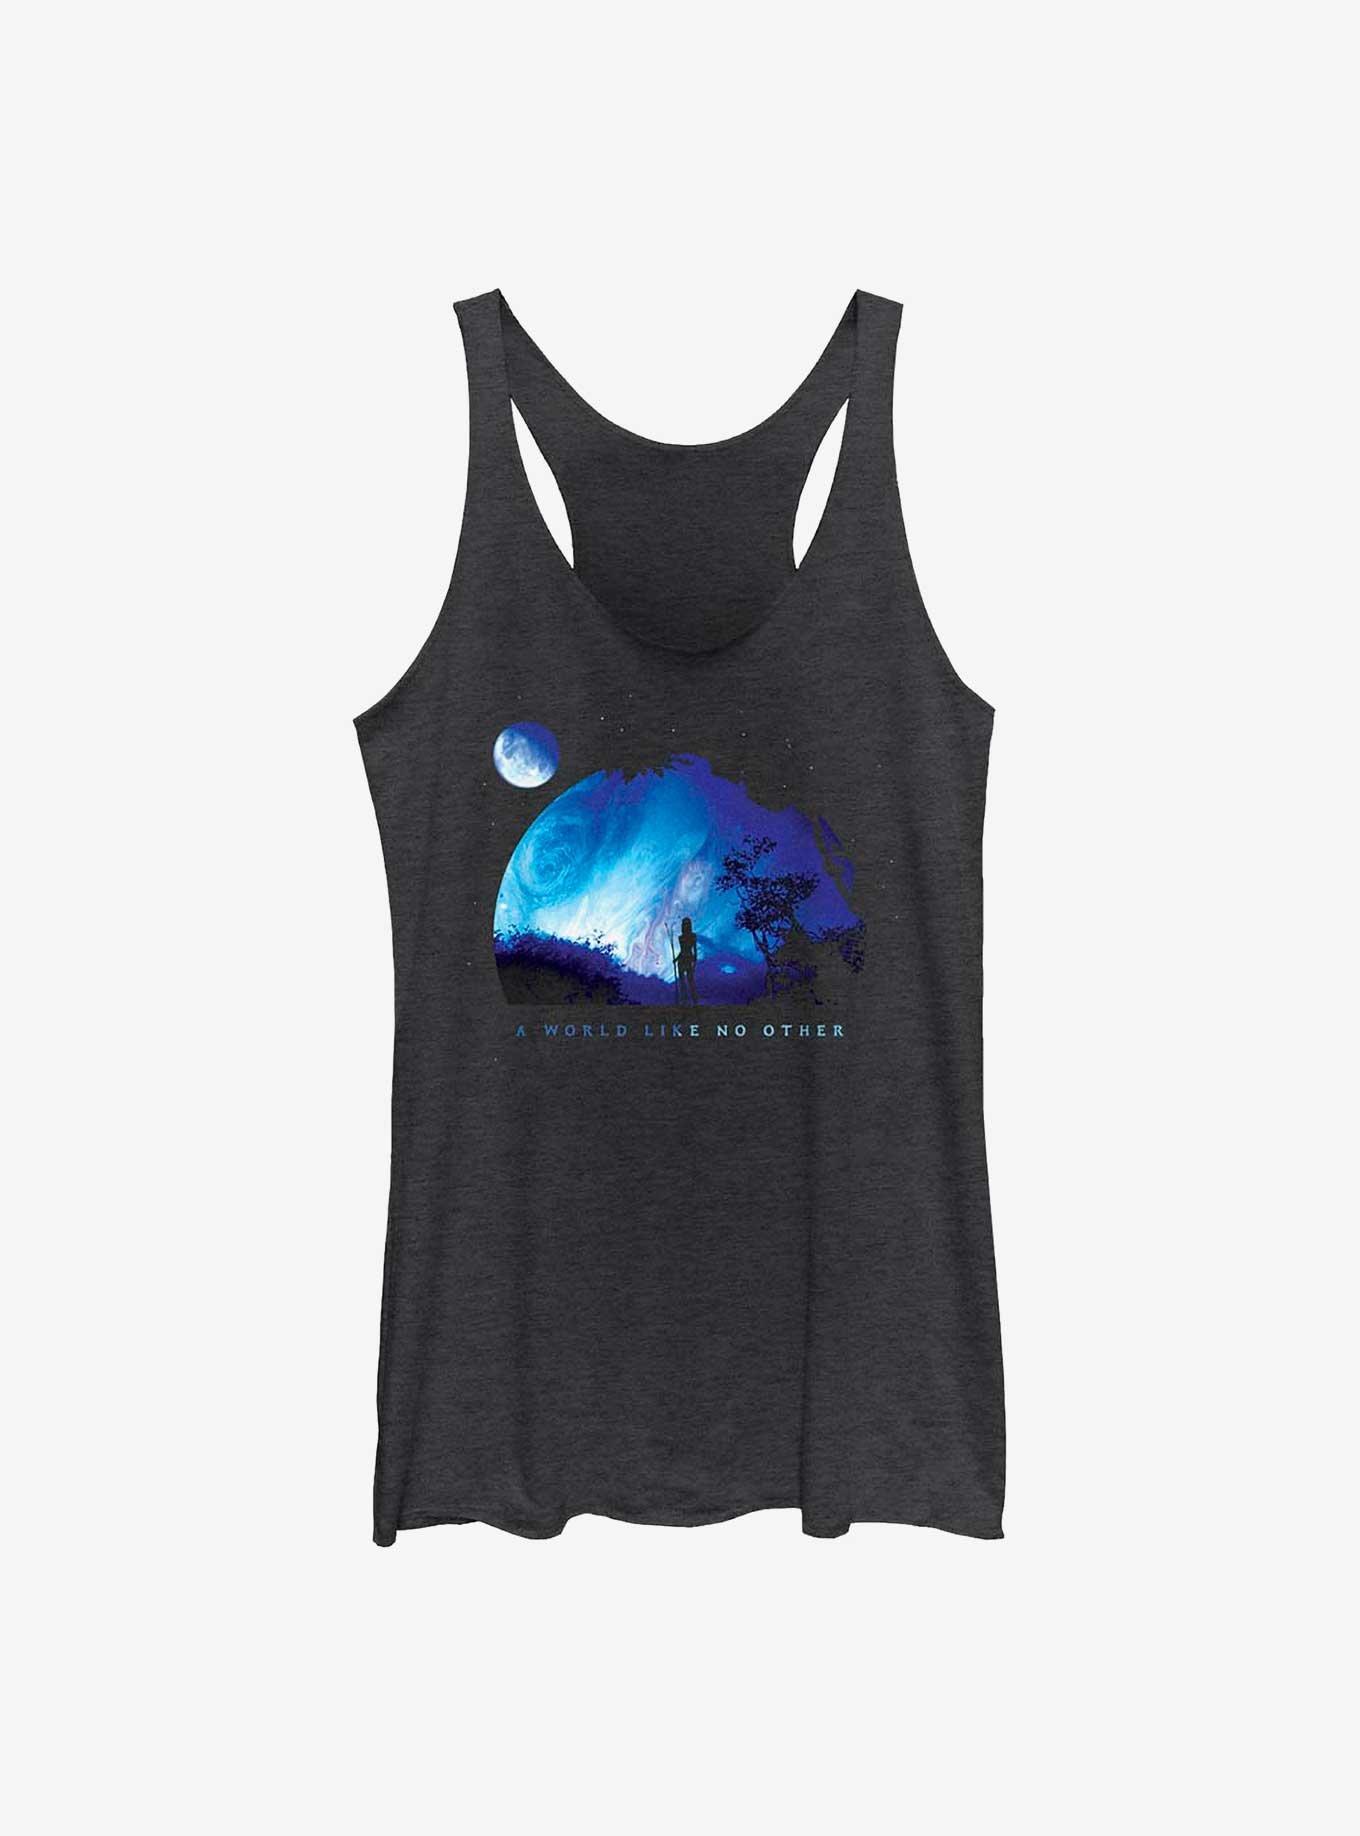 Avatar A World Like No Other Girls Tank, BLK HTR, hi-res